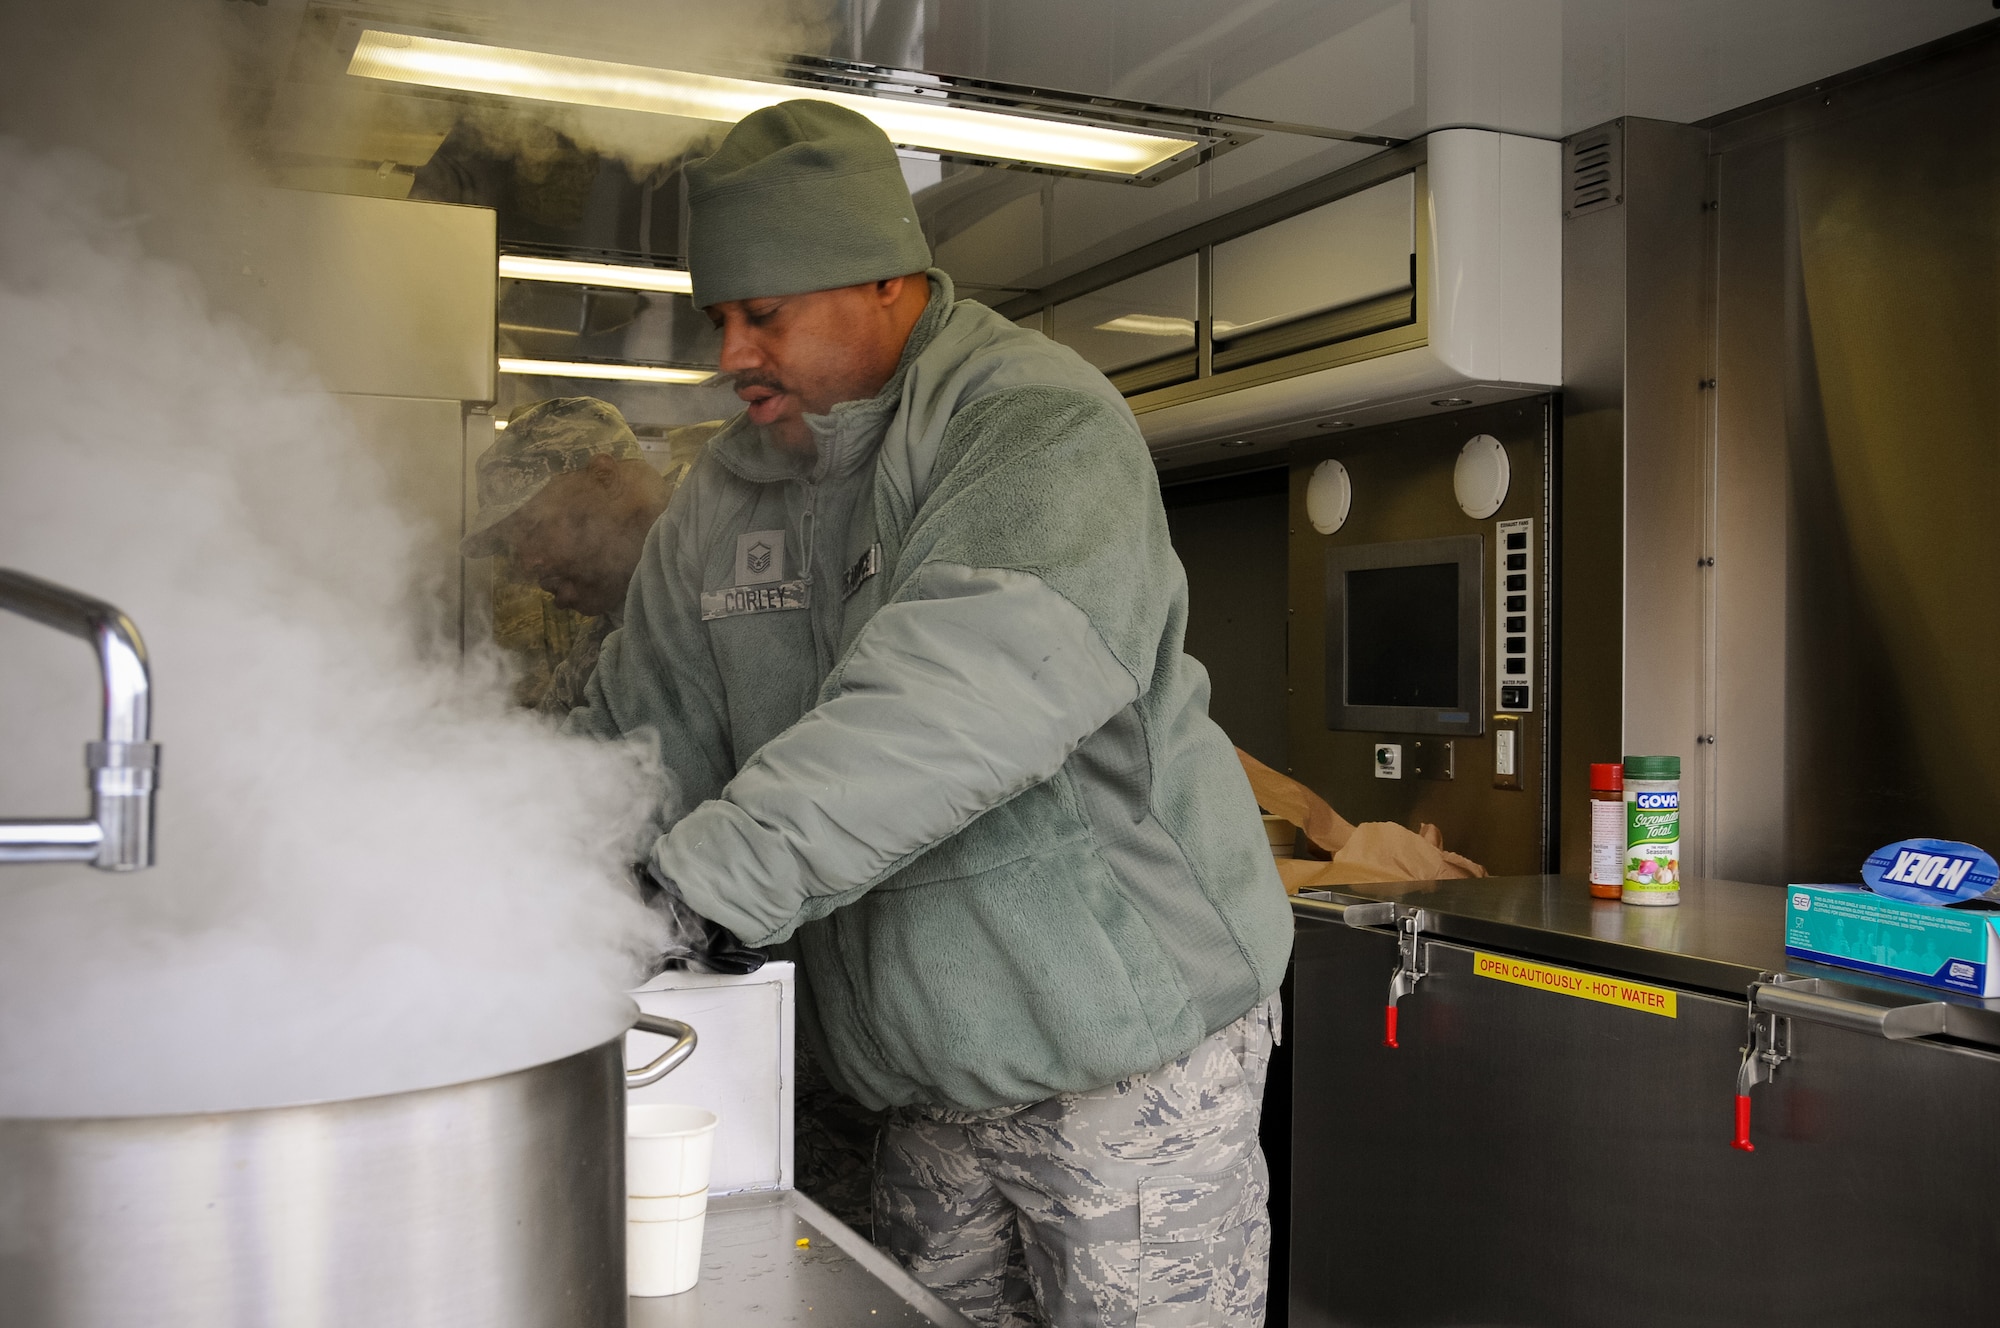 Master Sgt. Corey from the 113th Force Support Squadron prepares hot food during a new mobile field kitchen during a demonstration at Joint Base Andrews, Md., Nov. 3. The Disaster Relief Mobile Kitchen Trailer  can deploy to natural disaster sites to provide hot meals to relief workers and Airmen working in austere conditions. (U.S. Air force photo by Airman 1st Class Sumena Leslie/Released)